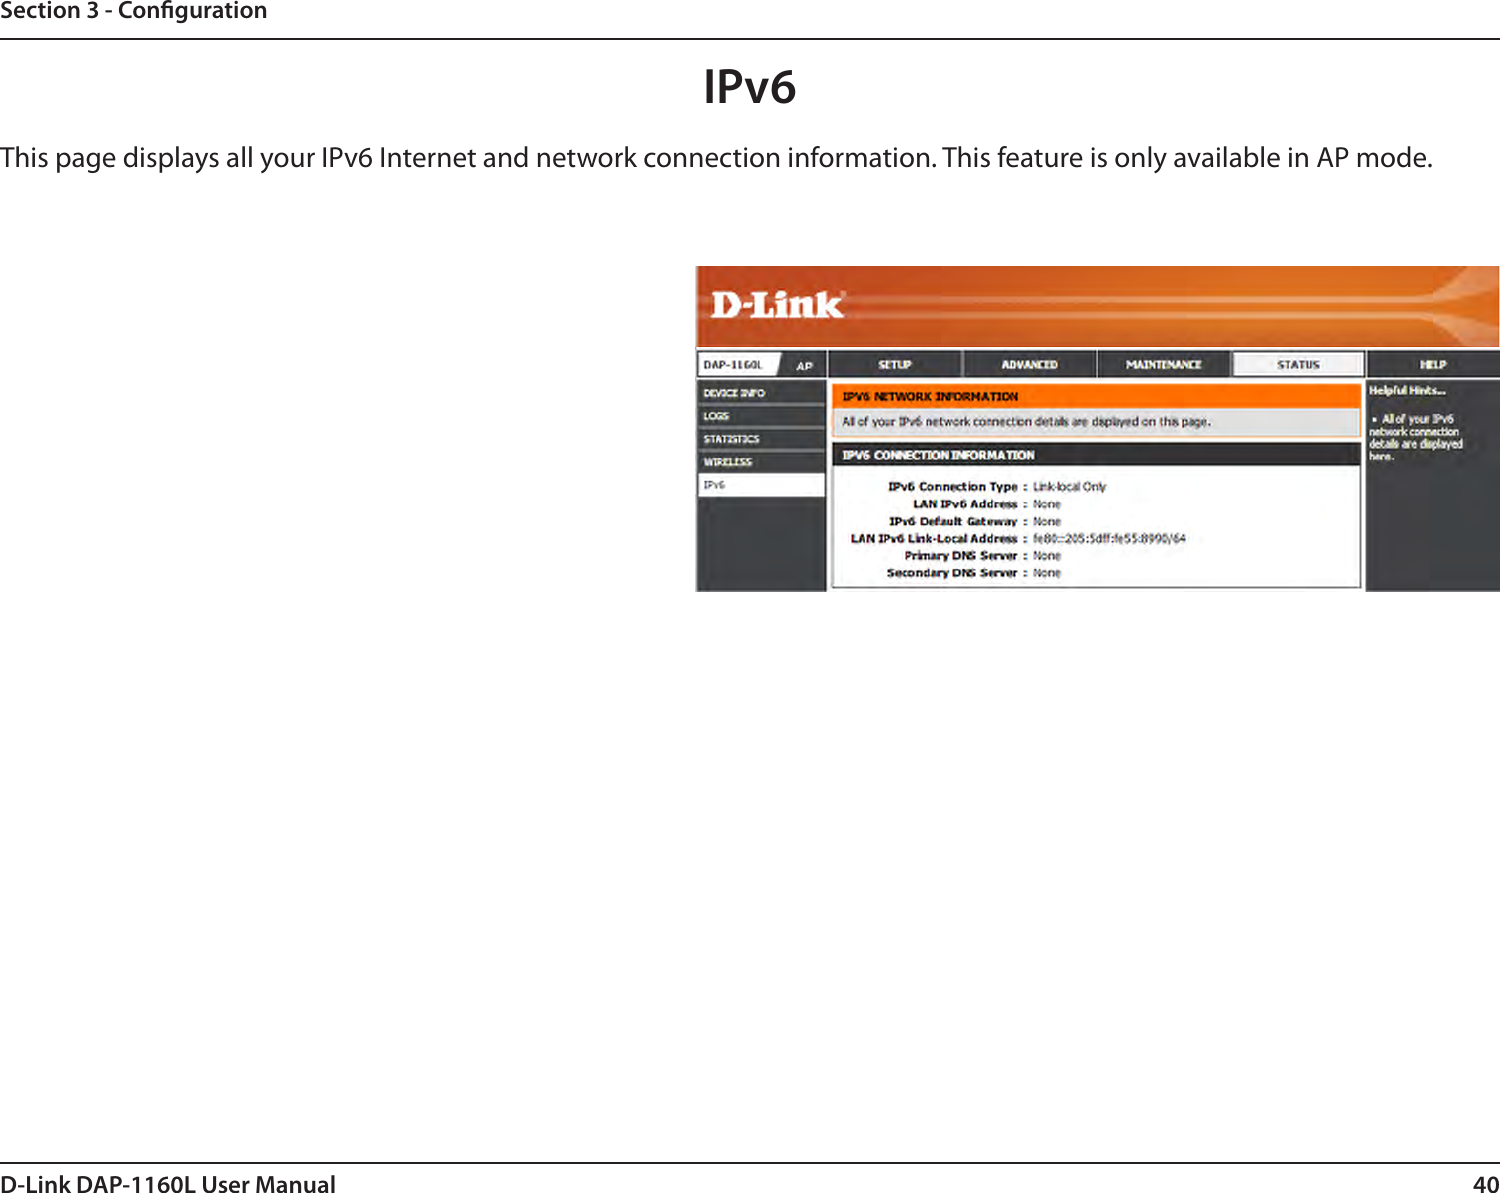 40D-Link DAP-1160L User ManualSection 3 - CongurationIPv6This page displays all your IPv6 Internet and network connection information. This feature is only available in AP mode.